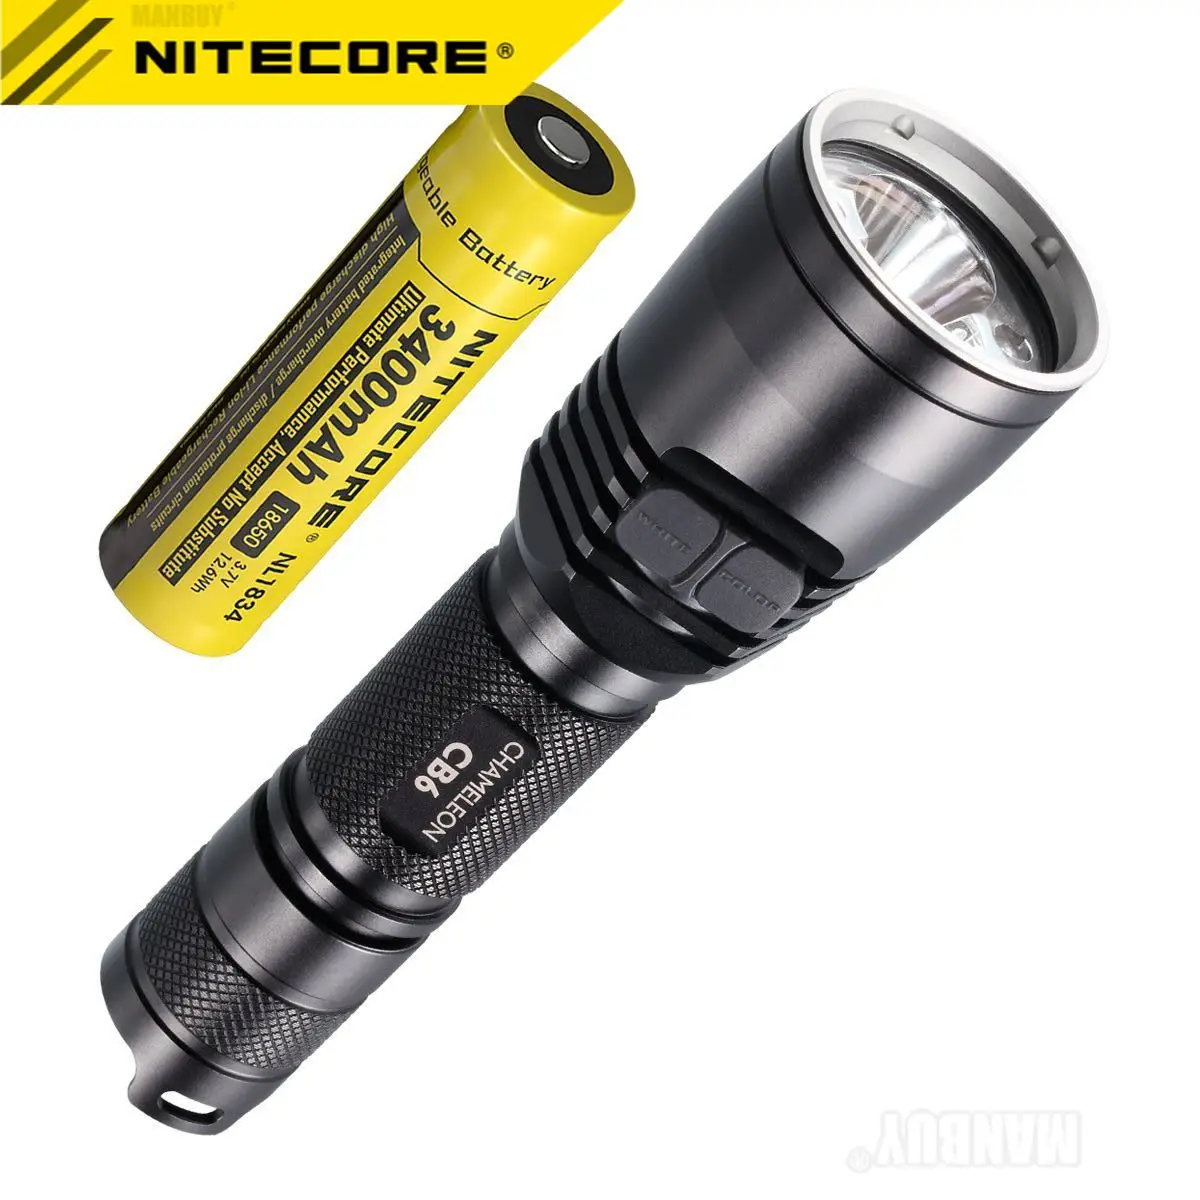 

Wholesale Nitecore CB6 Flashlight +3400mAh NL1834 Rechargeable Battery CREE LED Outdoor Camping Hunting Search Waterproof Torch